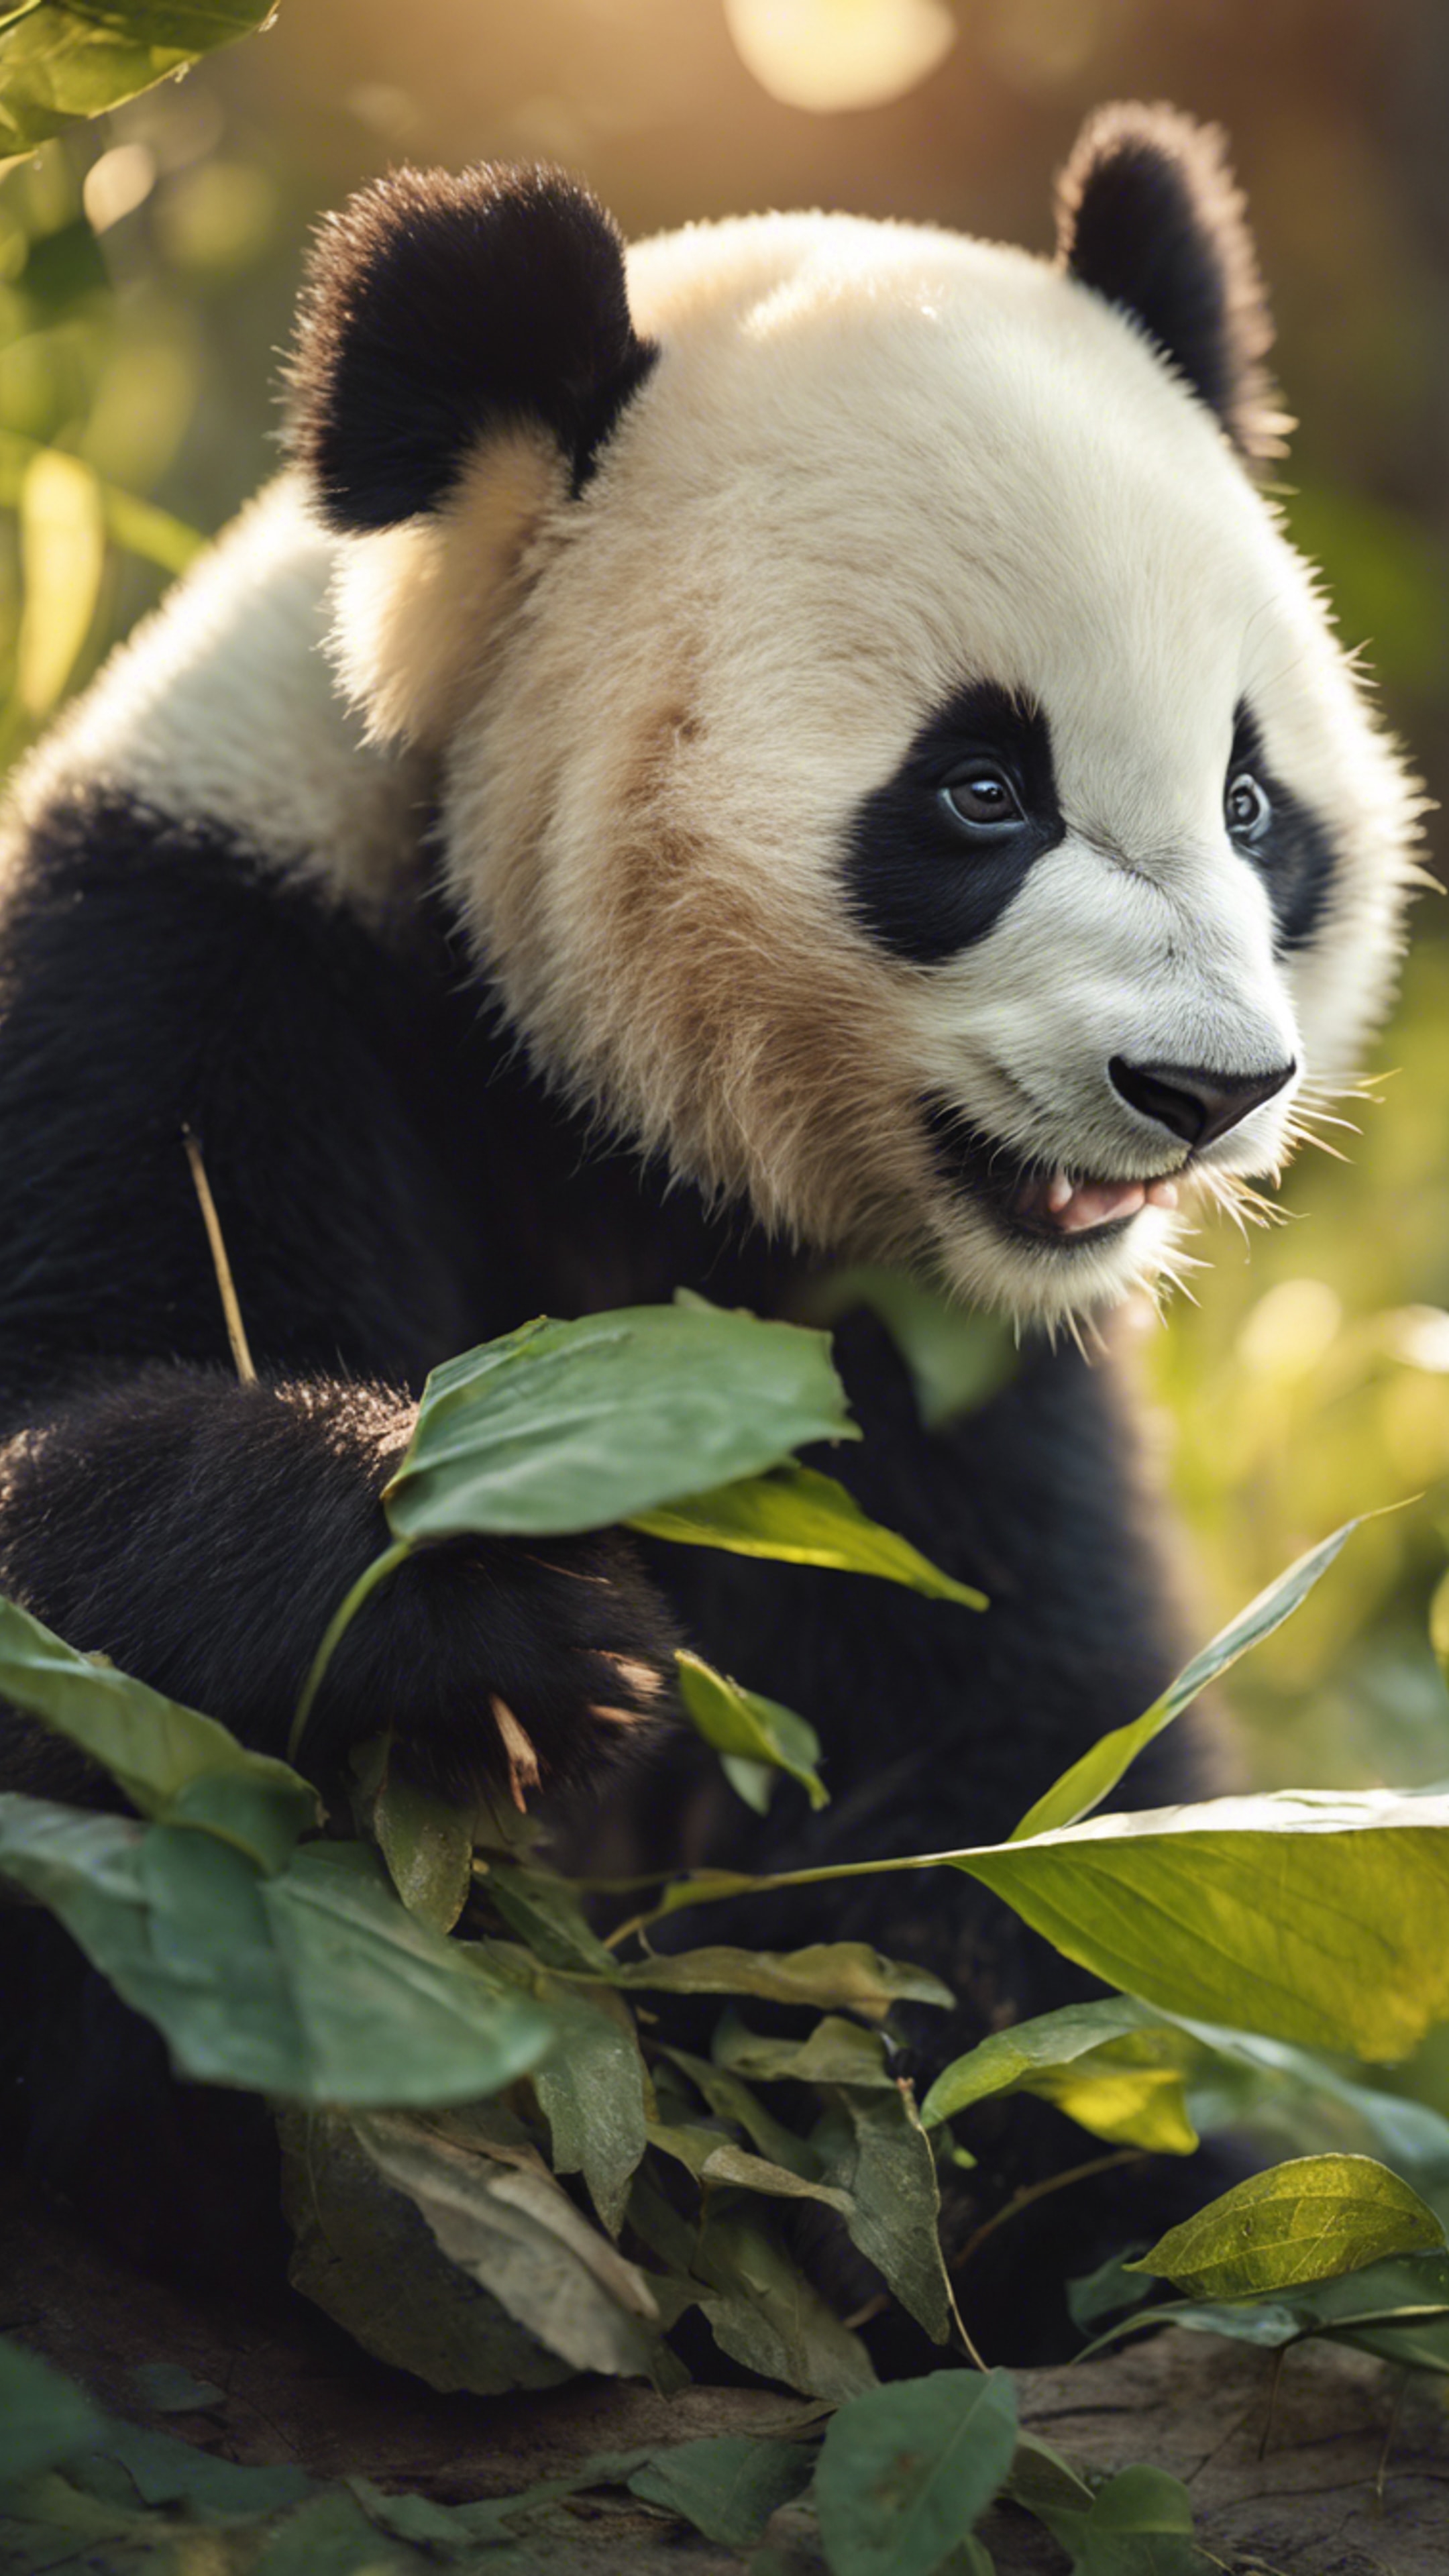 A young panda bear adorably nibbling on a leaf in the soft glow of morning light. Papel de parede[df98dc8ca776441d85bc]